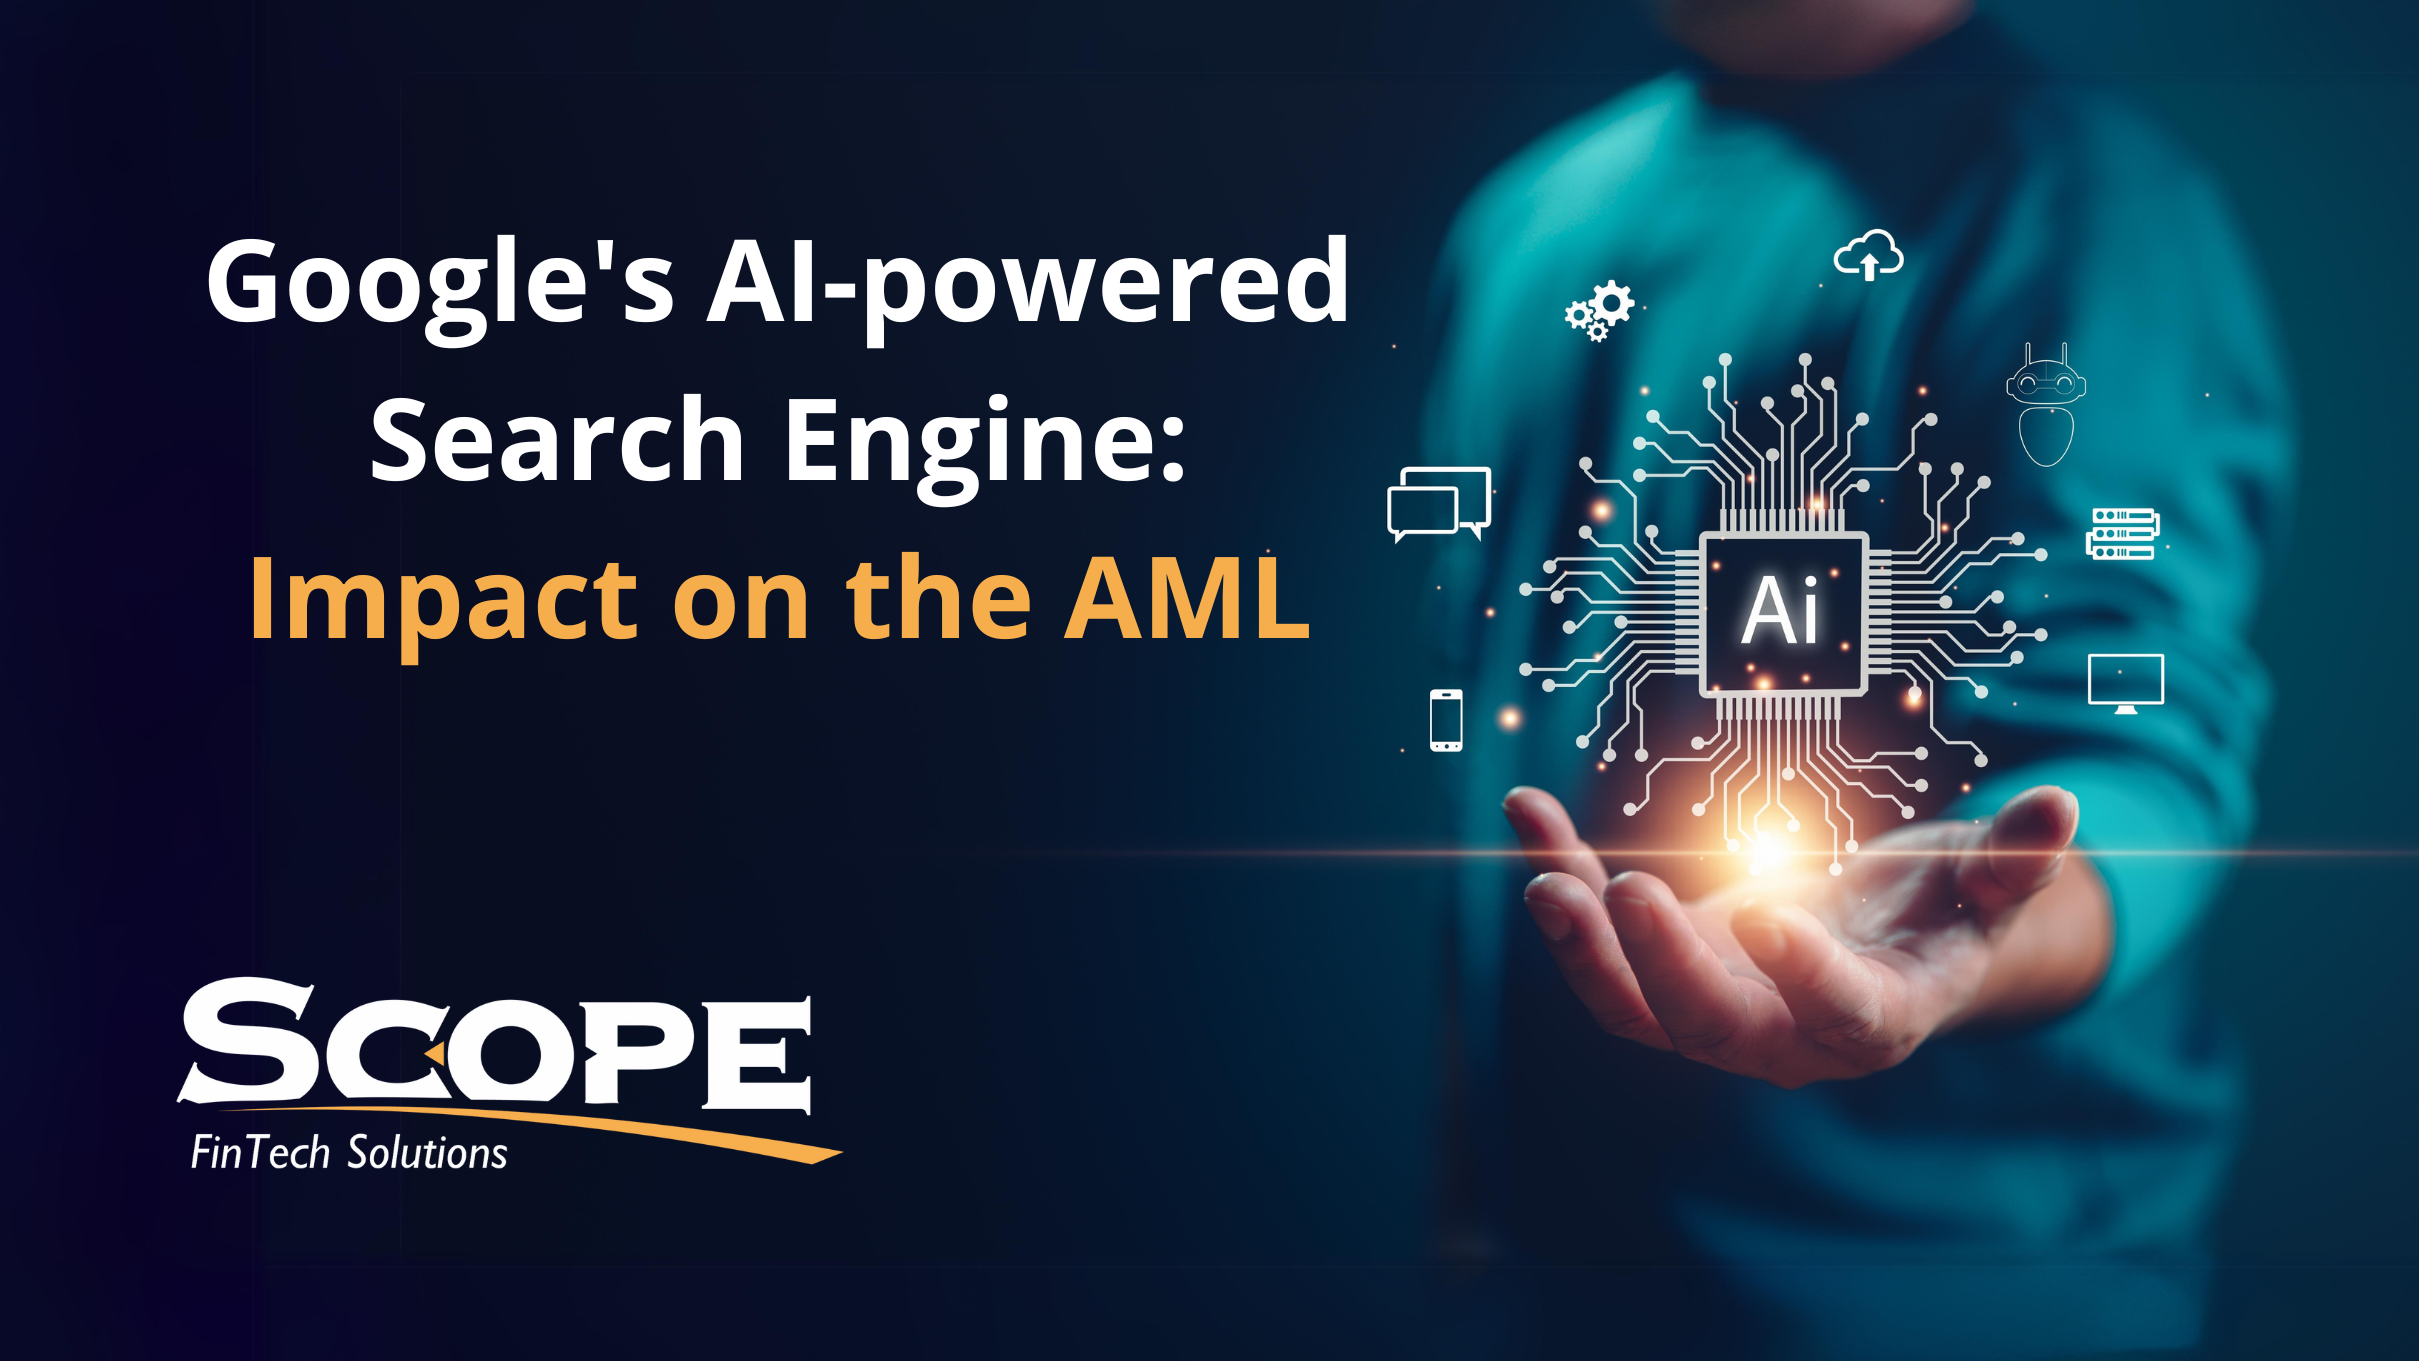 Google's AI-powered Search Engine: Impact on the AML